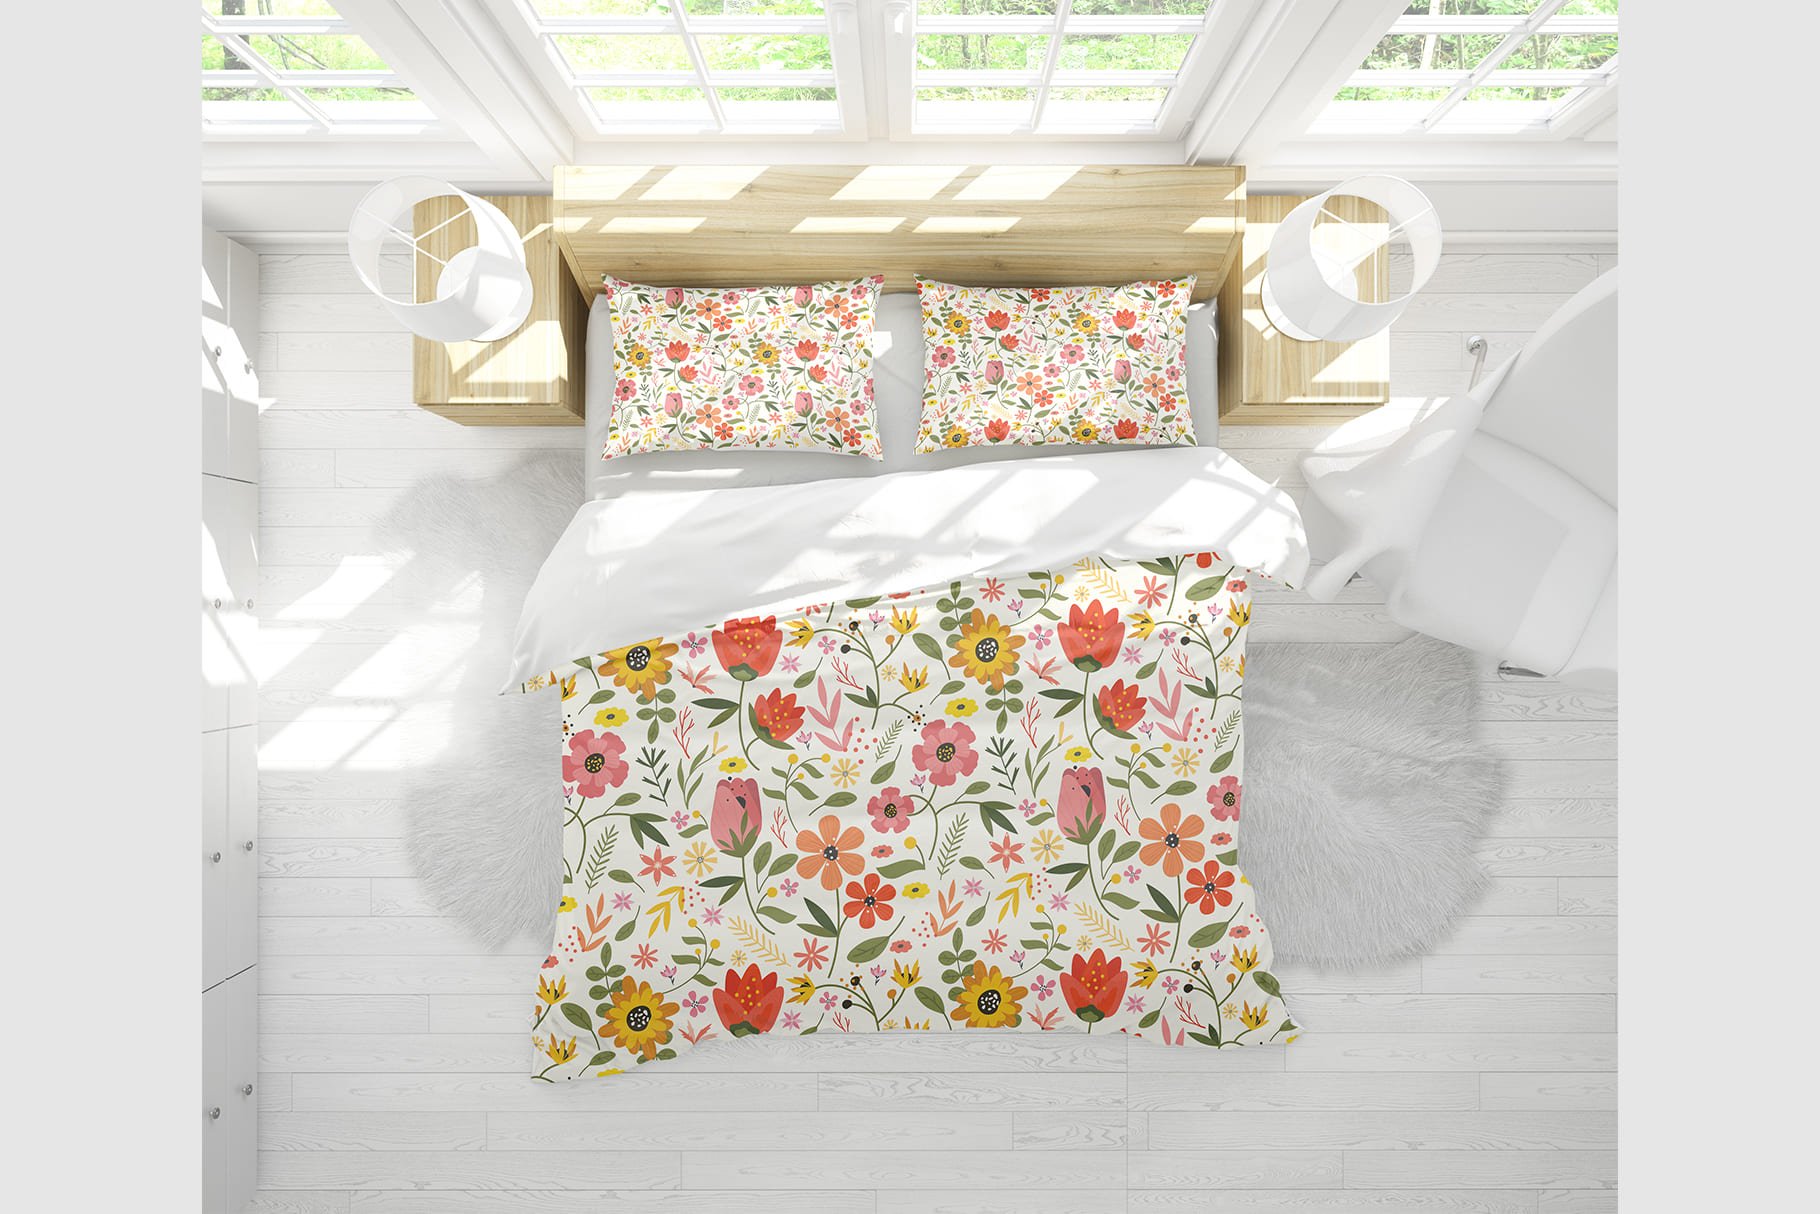 Delicate bed linen in a floral decoration.